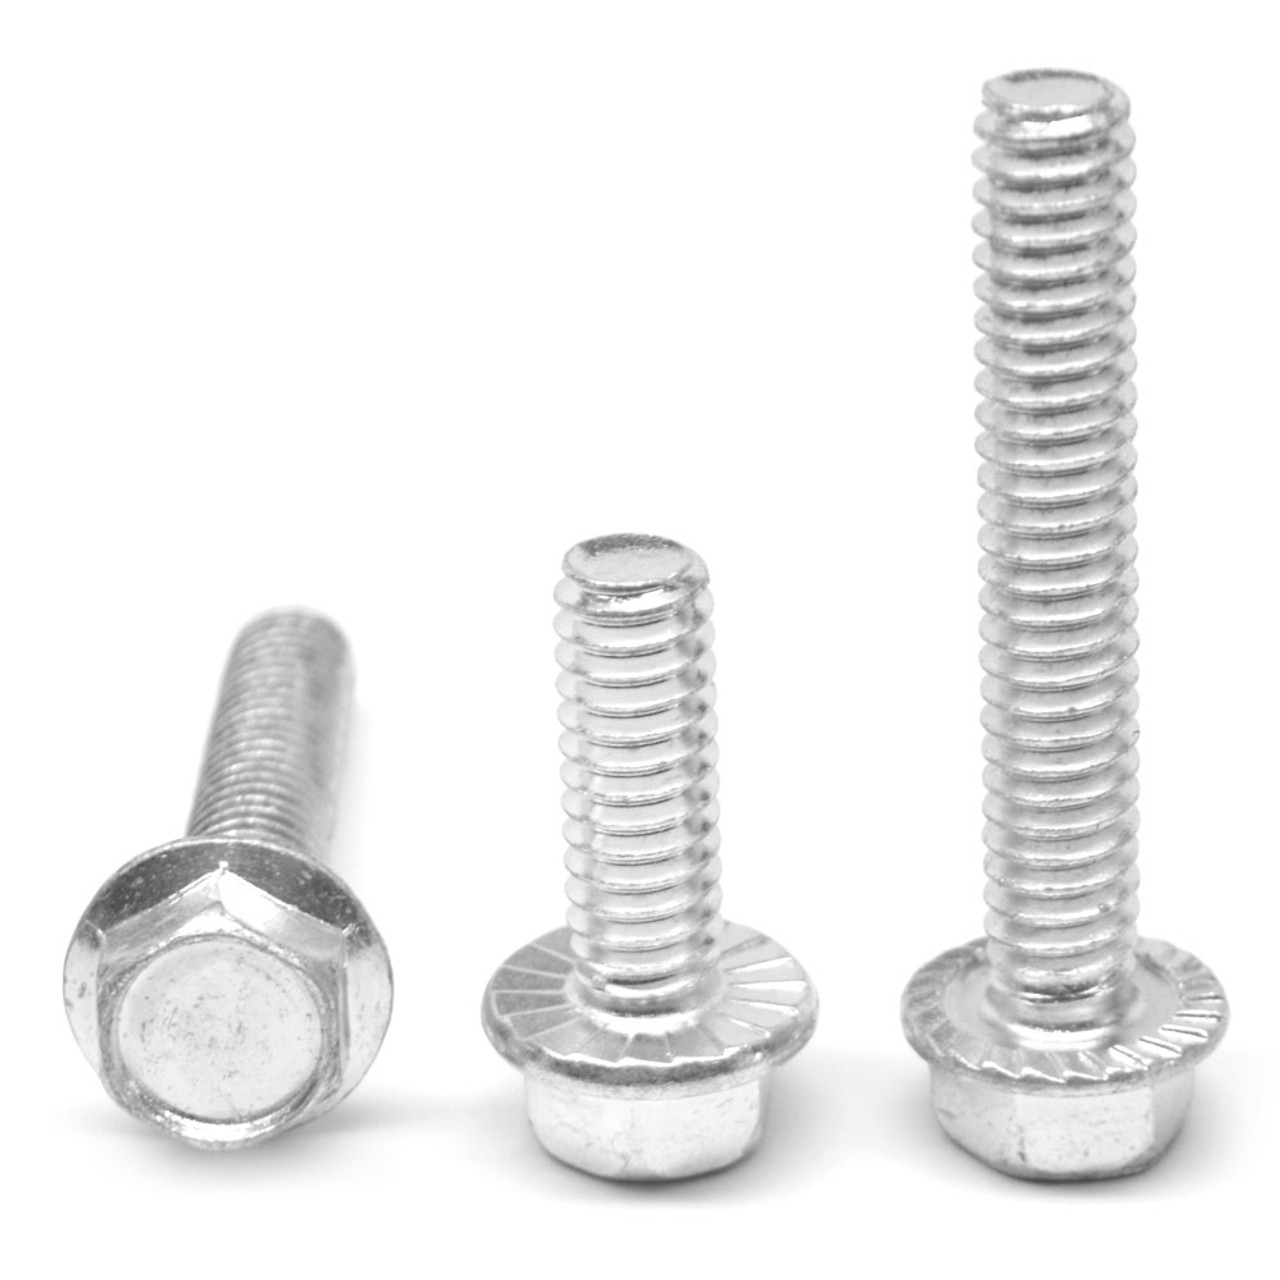 #6-32 x 3/4" (FT) Coarse Thread Hex Flange Screw with Serration Case Hardened Low Carbon Steel Zinc Plated